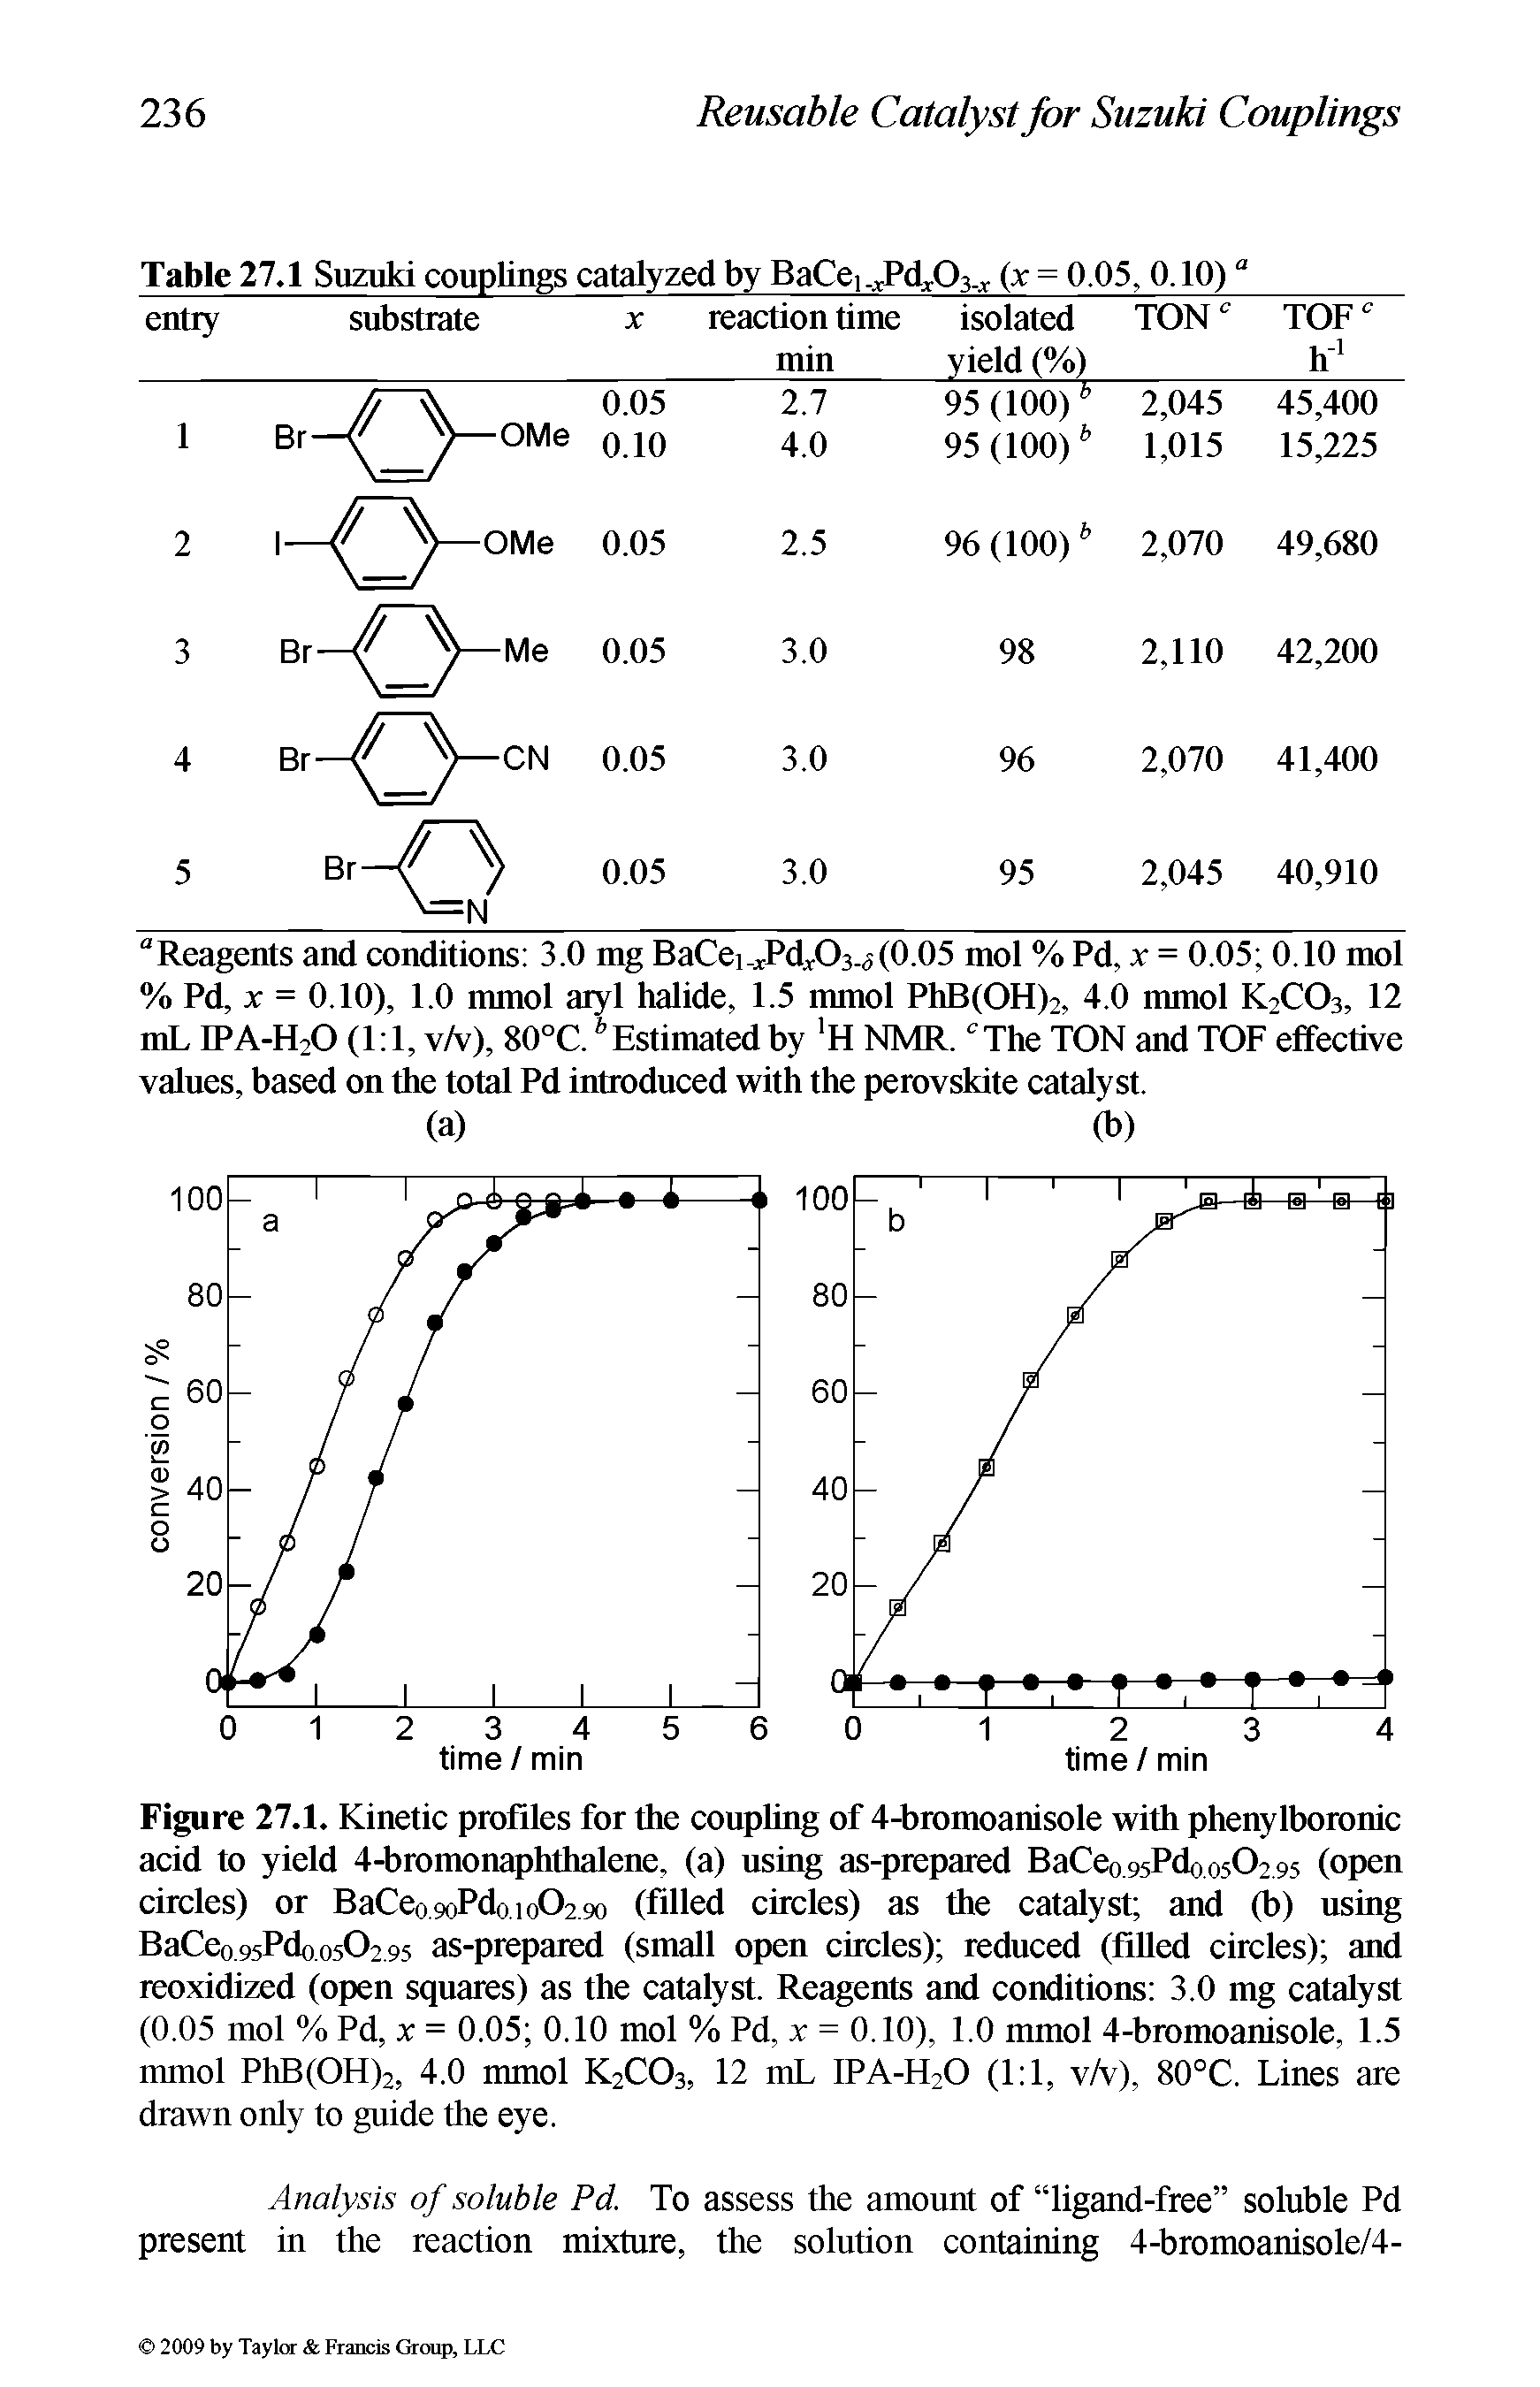 Figure 27.1. Kinetic profiles for the coupling of 4-bromoanisole with phenylboronic acid to yield 4-bromonaphthalene, (a) using as-prepared BaCeo95Pdoo502 95 (open circles) or BaCeo9oPdoio02 9o (filled circles) as the catalyst and (b) using BaCeo95Pdoos02 95 as-prepared (small open circles) reduced (filled circles) and reoxidized (open squares) as the catalyst. Reagents and conditions 3.0 mg catalyst (0.05 mol % Pd, X = 0.05 0.10 mol % Pd, x = 0.10), 1.0 mmol 4-bromoanisole, 1.5 mmol PhB(OH)2, 4.0 mmol K2CO3, 12 mL IPA-H2O (1 1, v/v), 80°C. Lines are drawn only to guide the eye.